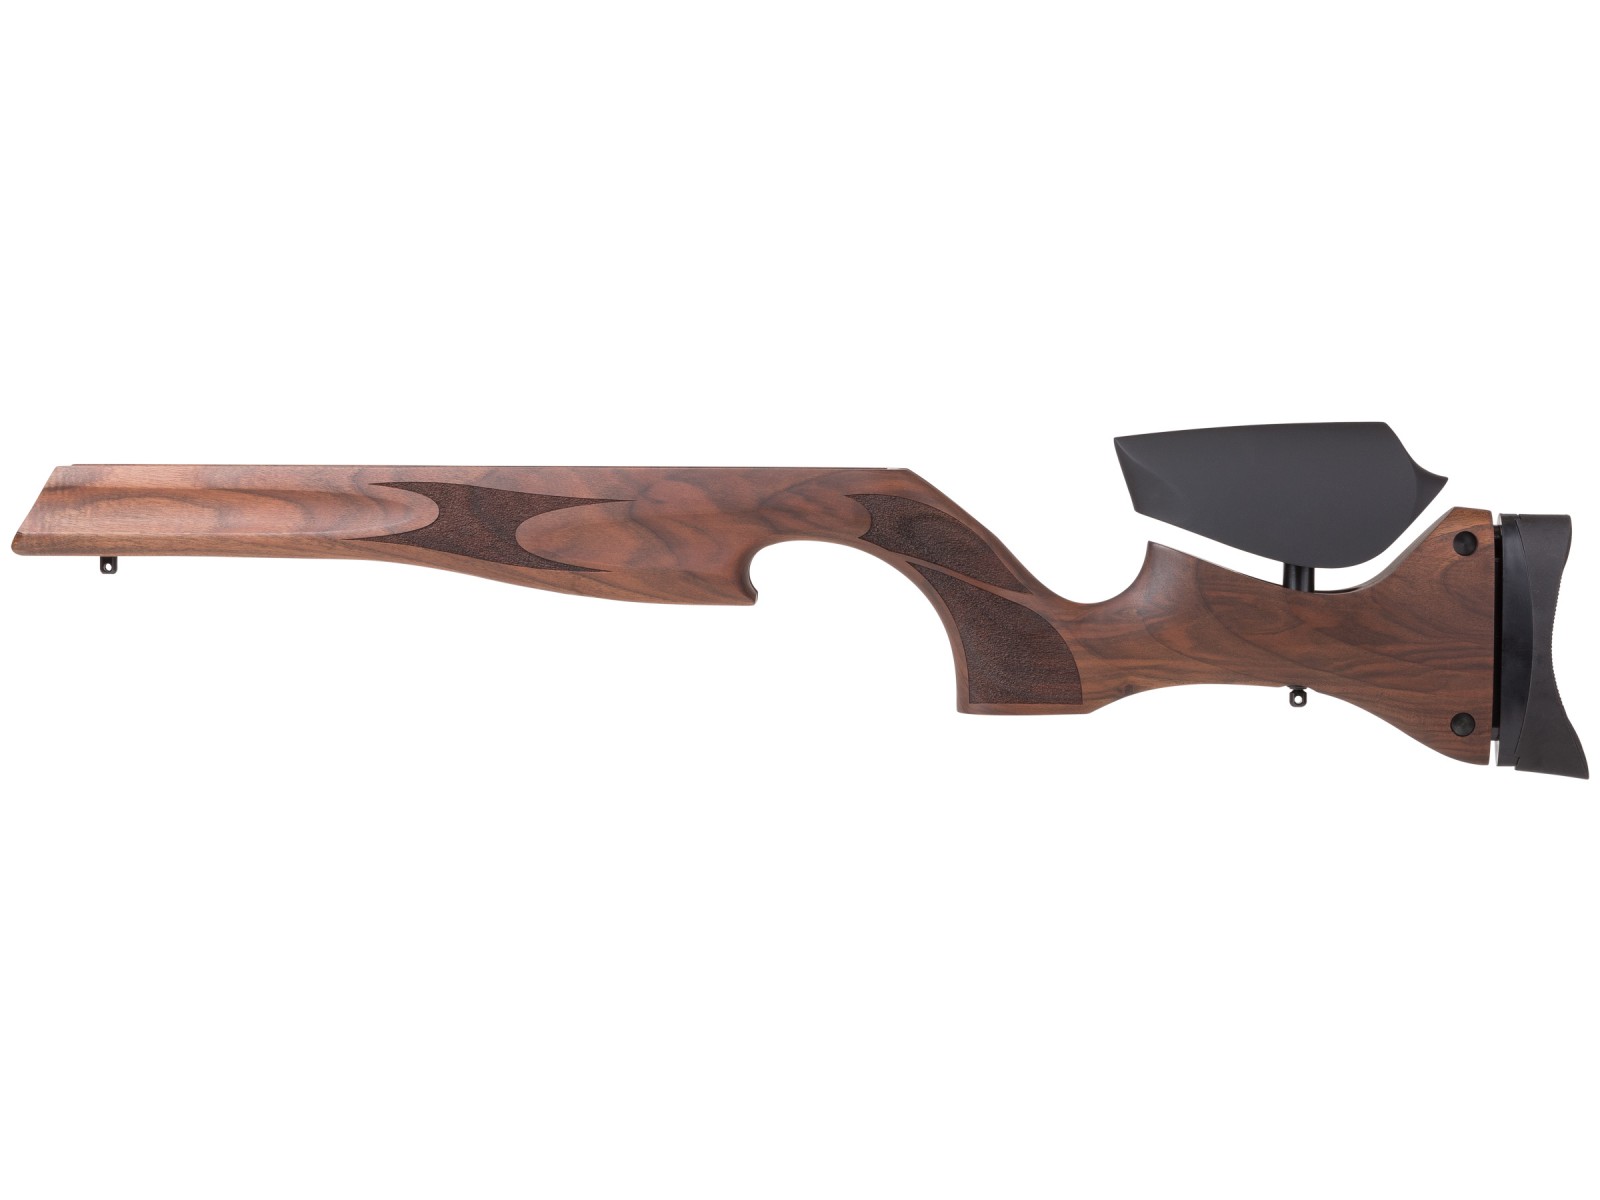 Air Arms S510 XS Ultimate Sporter Replacement Stock, Walnut